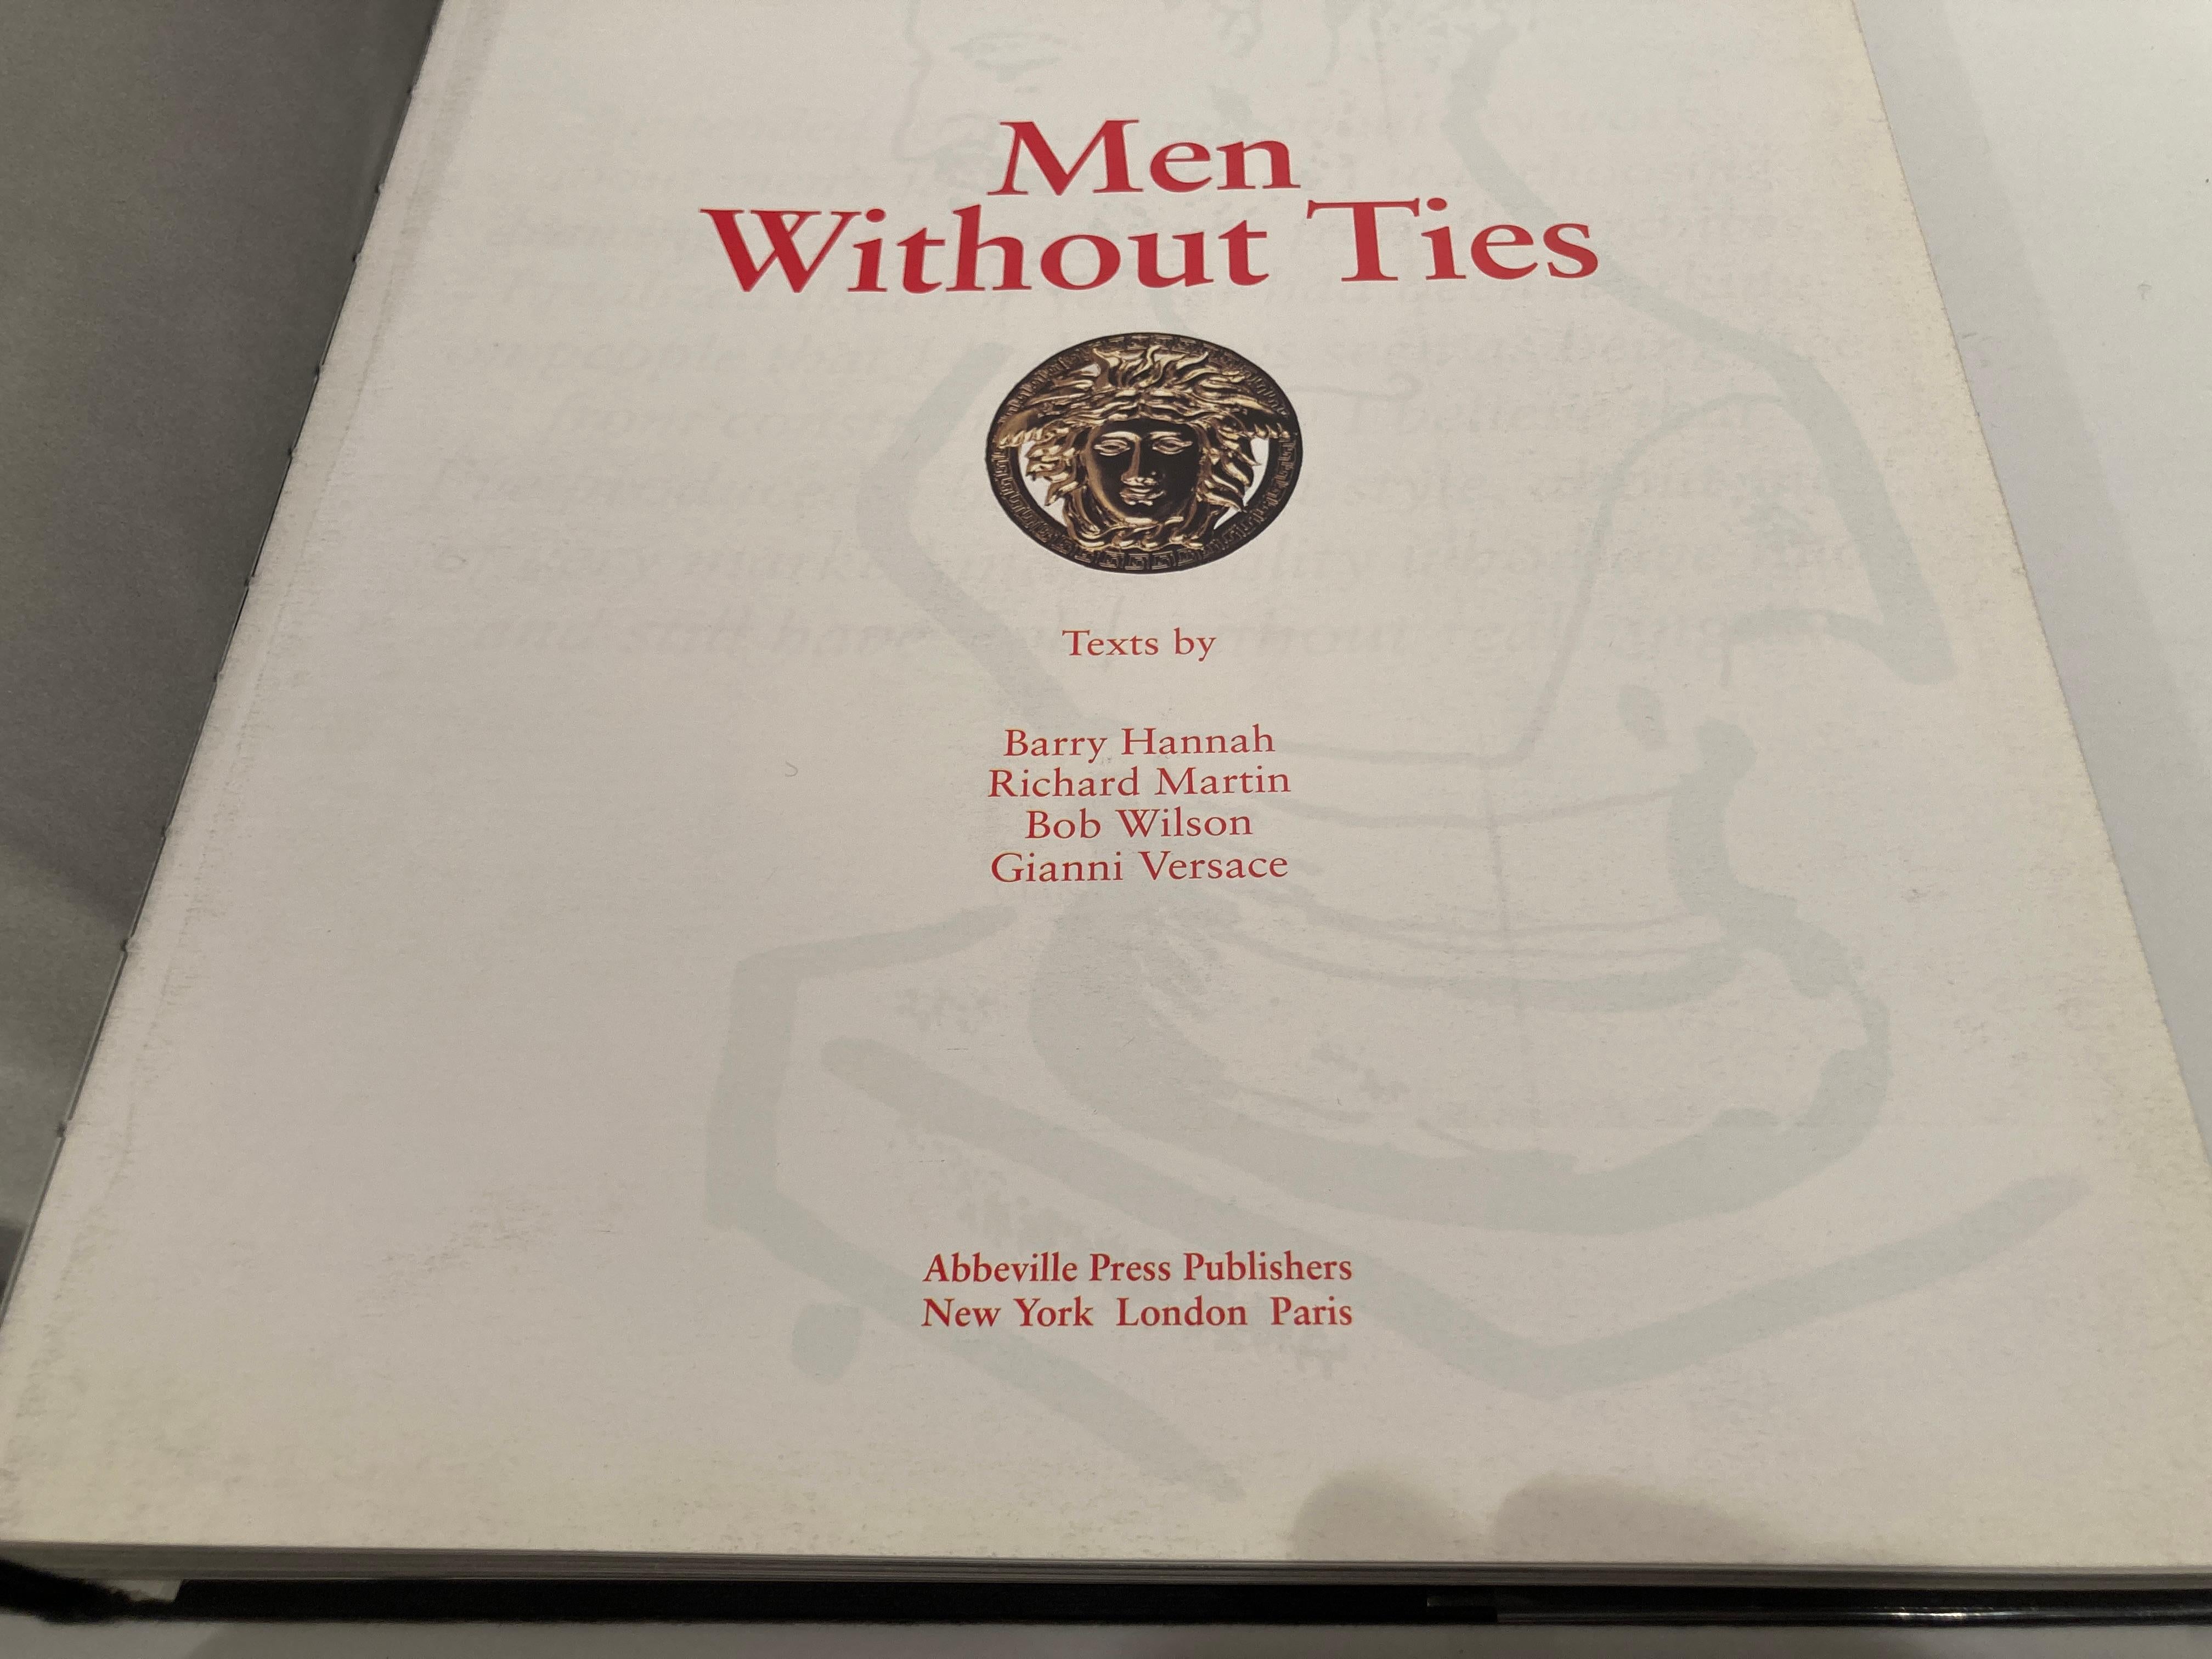 Women's or Men's Men Without Ties by Gianni Versace Hardcover Book 1994 1st Edition